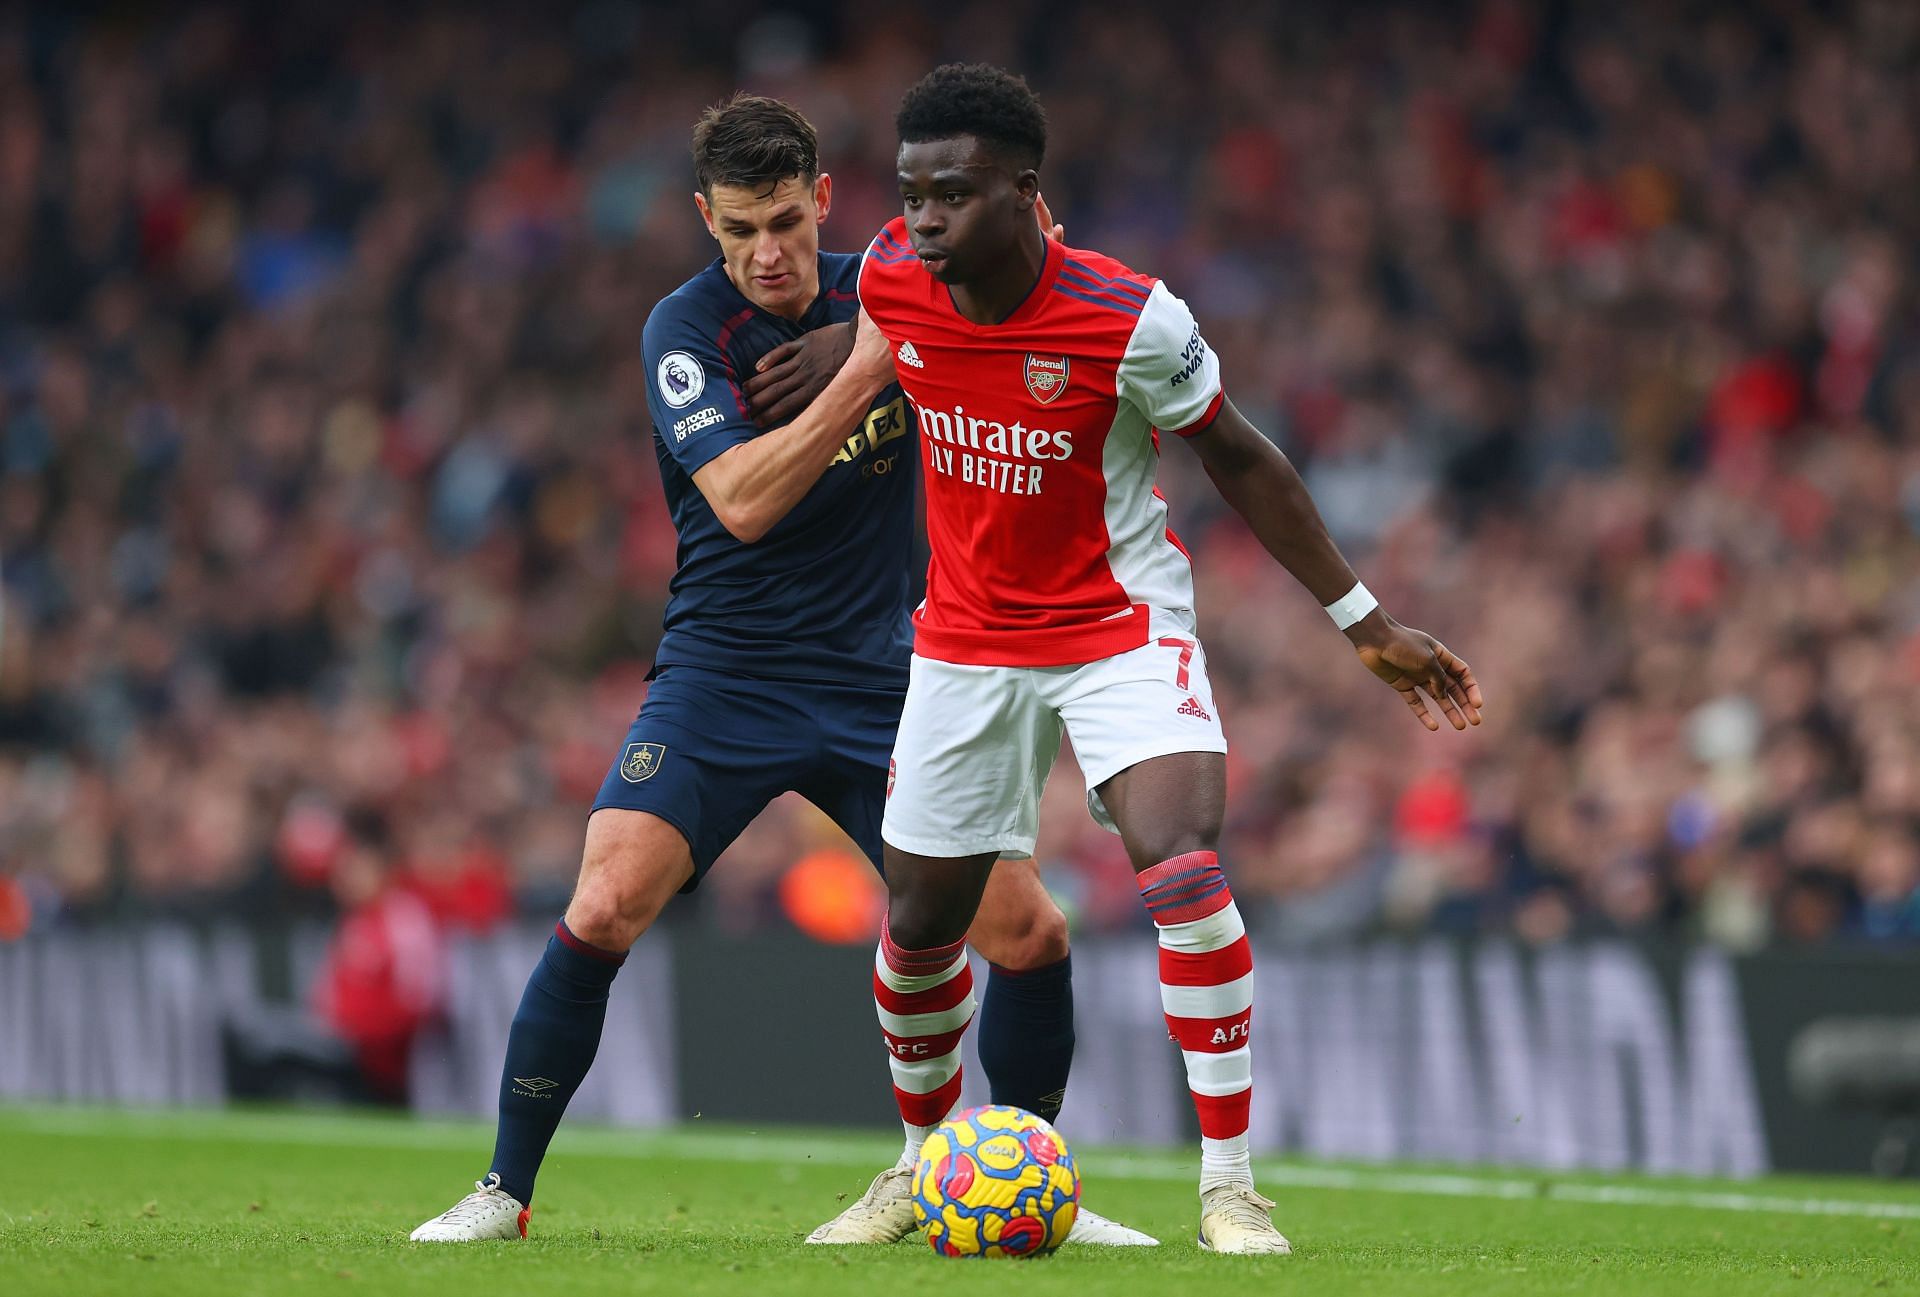 Saka in action for the Gunners